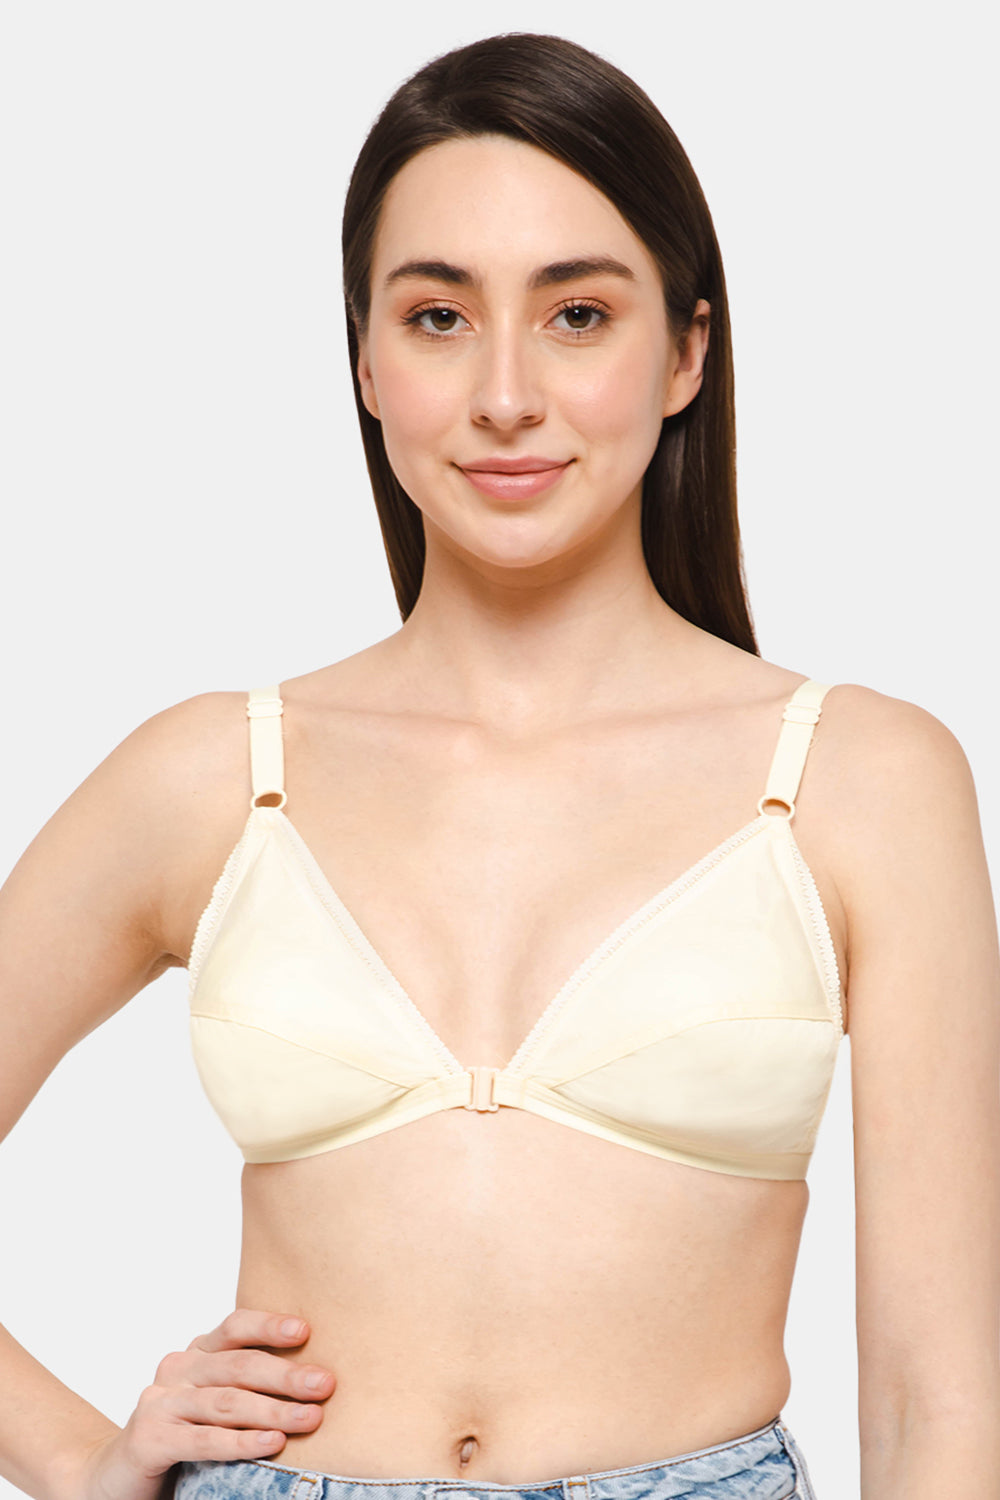 Black Cotton Bra for Versatile Style in Bhatinda at best price by